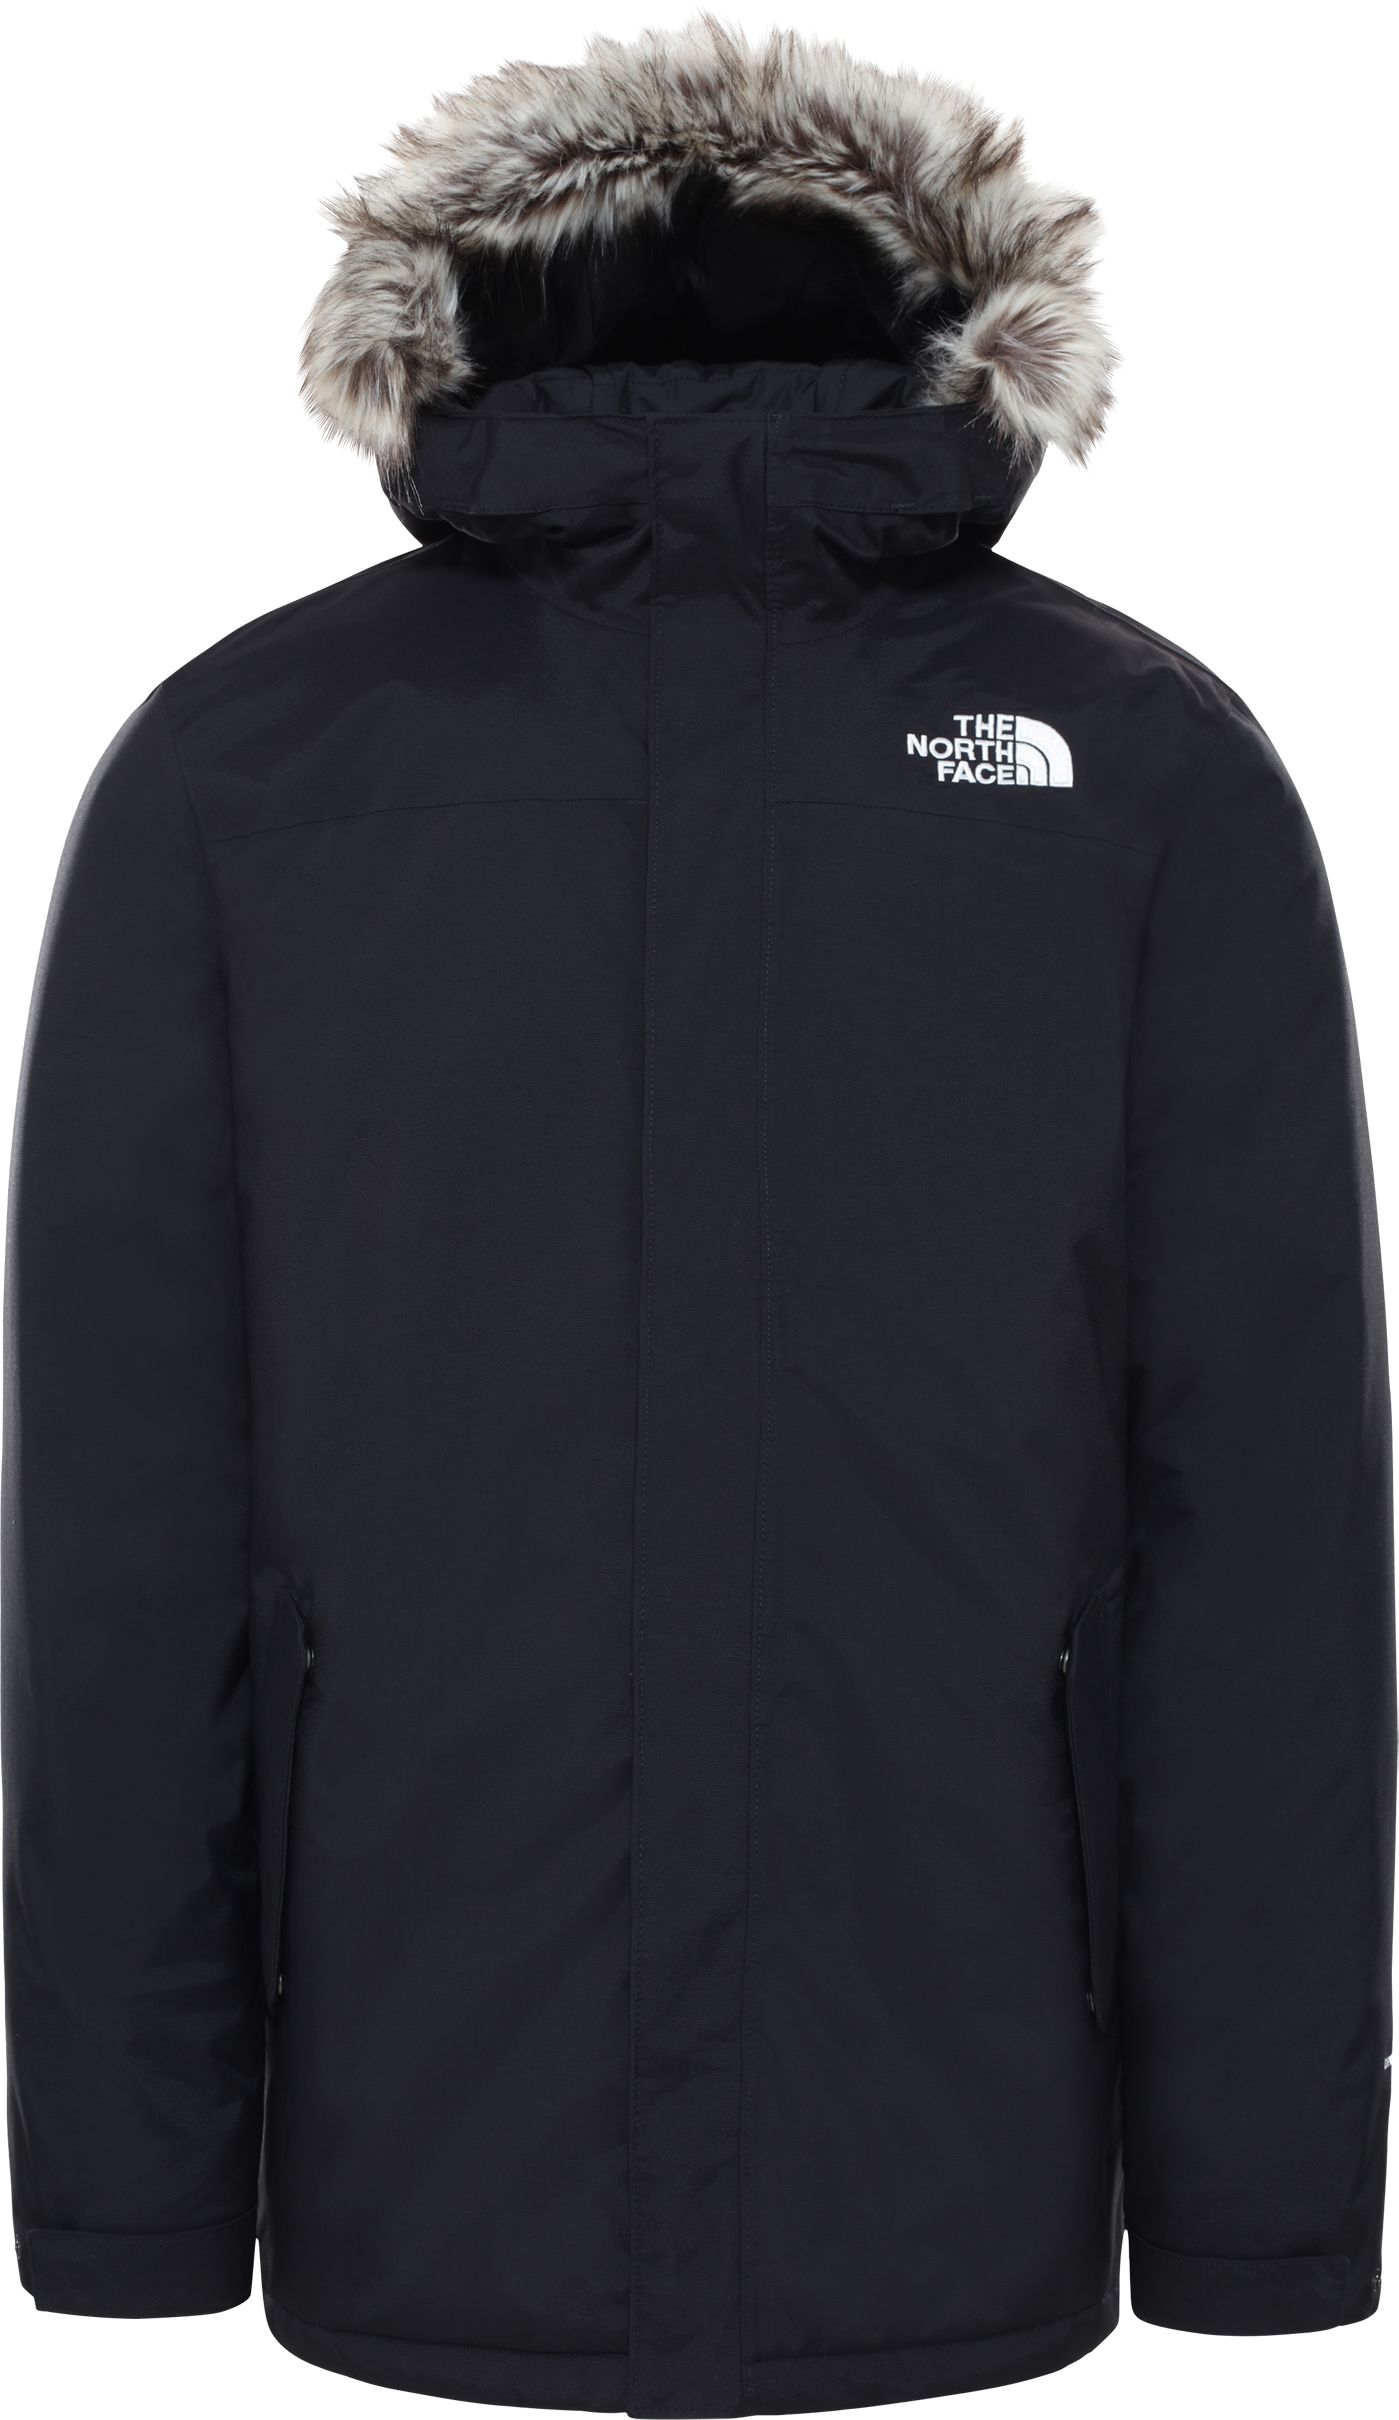 THE NORTH FACE, M RECYCLED ZANECK JKT